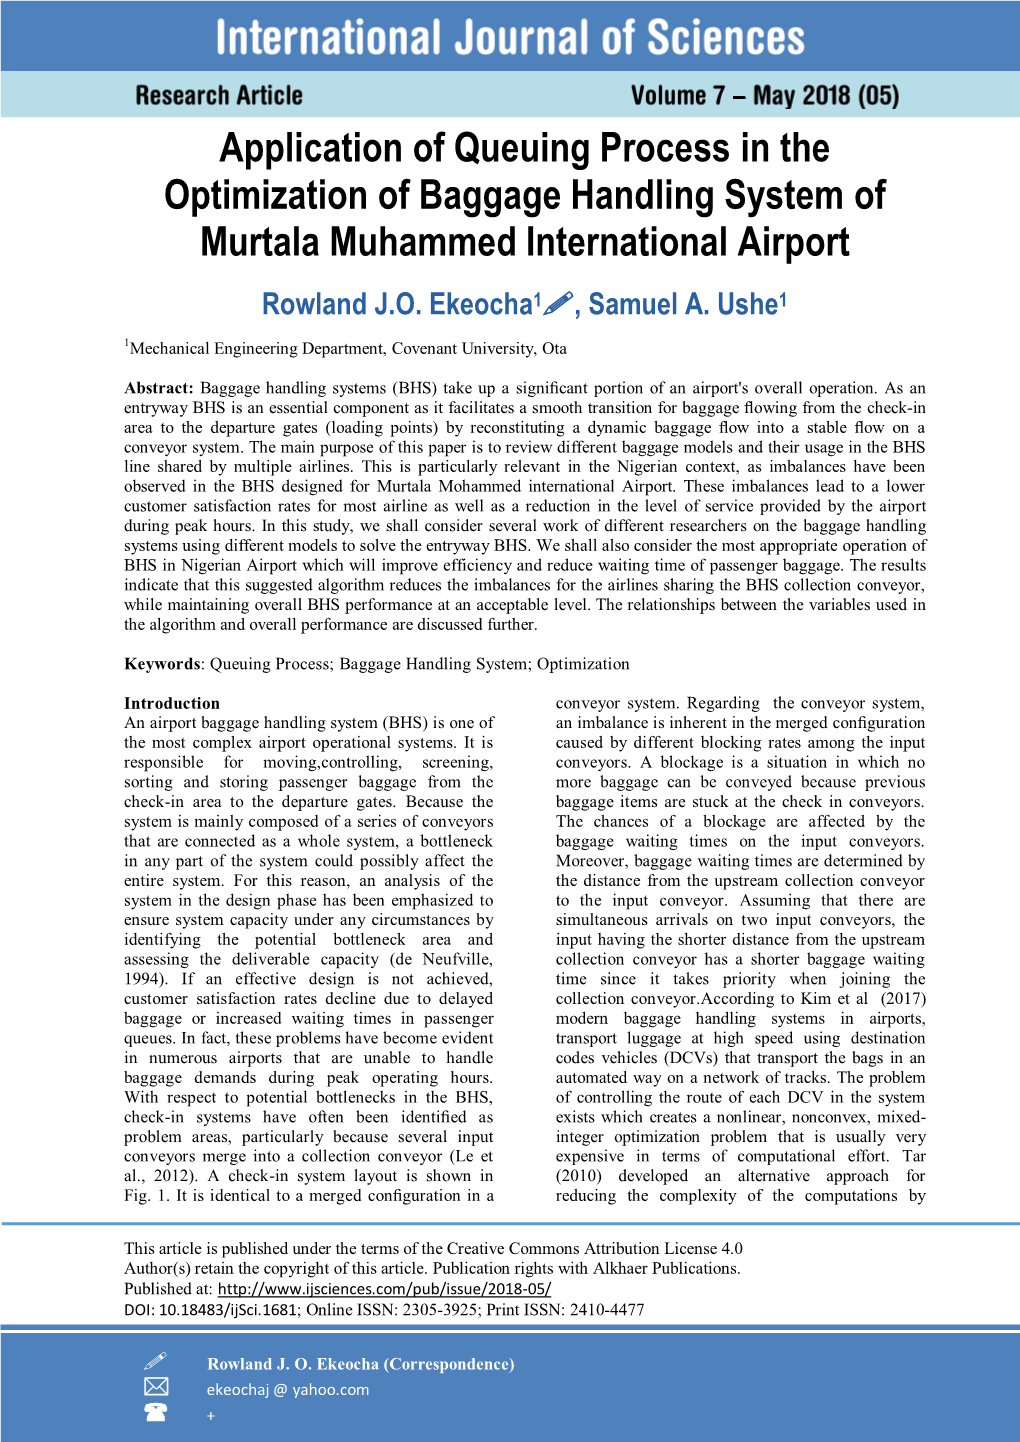 Application of Queuing Process in the Optimization of Baggage Handling System of Murtala Muhammed International Airport Rowland J.O